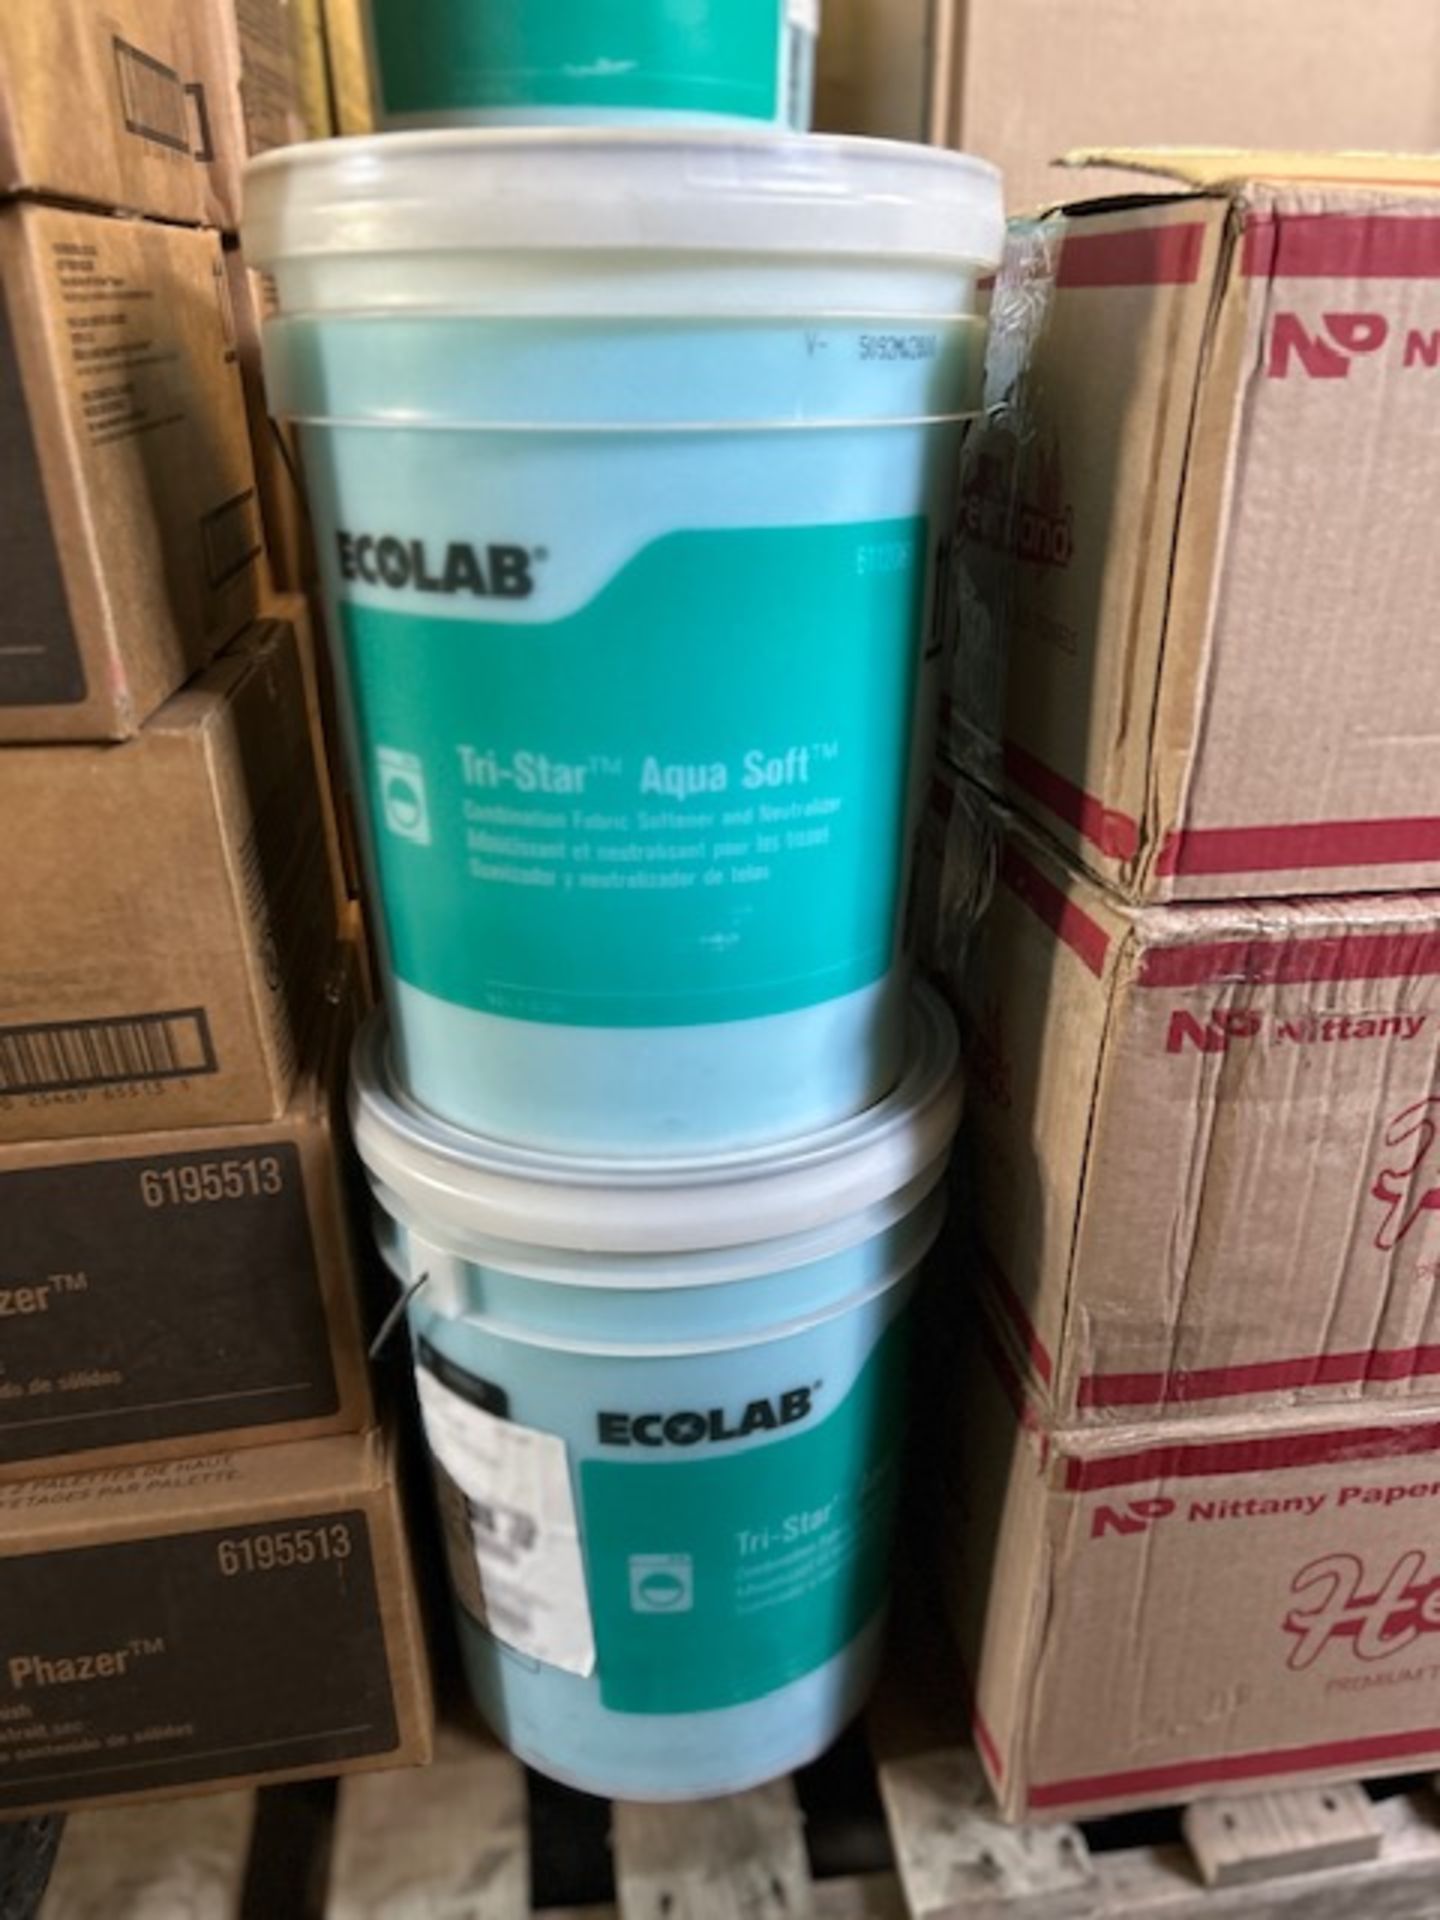 (5) - 5 Gallon Pails EcoLab #6112081 Fabric Softener and Neutralizer - Image 2 of 2